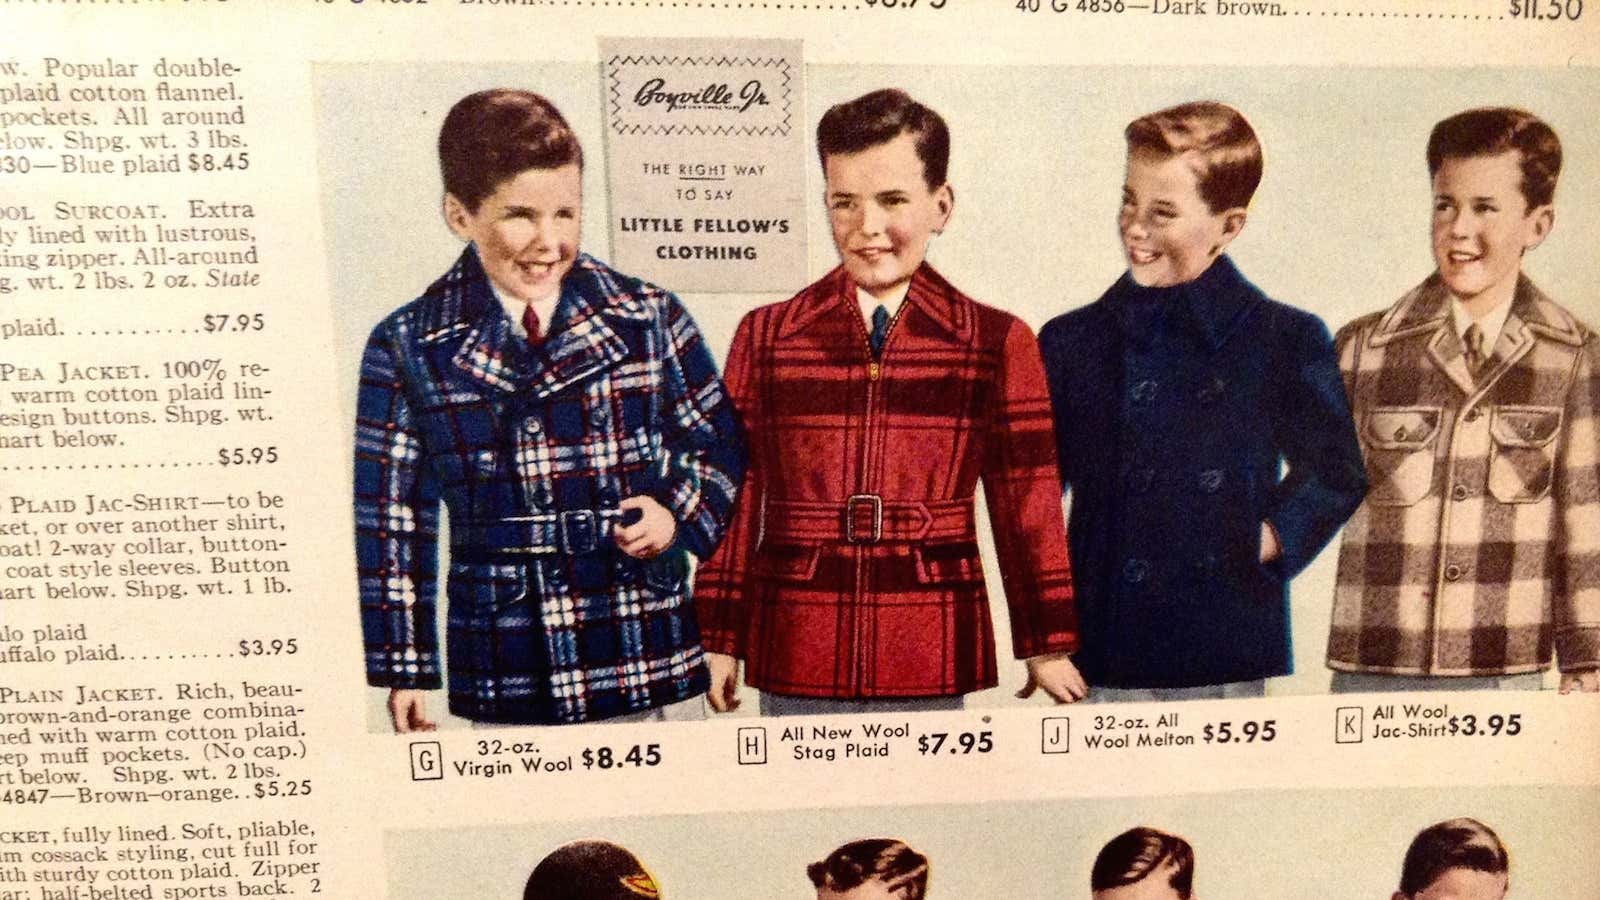 “Would I please send six boys’ size 10/12 and 14/16 red velvet blazer vests with brass buttons—the [Montagnard] were of small stature.”